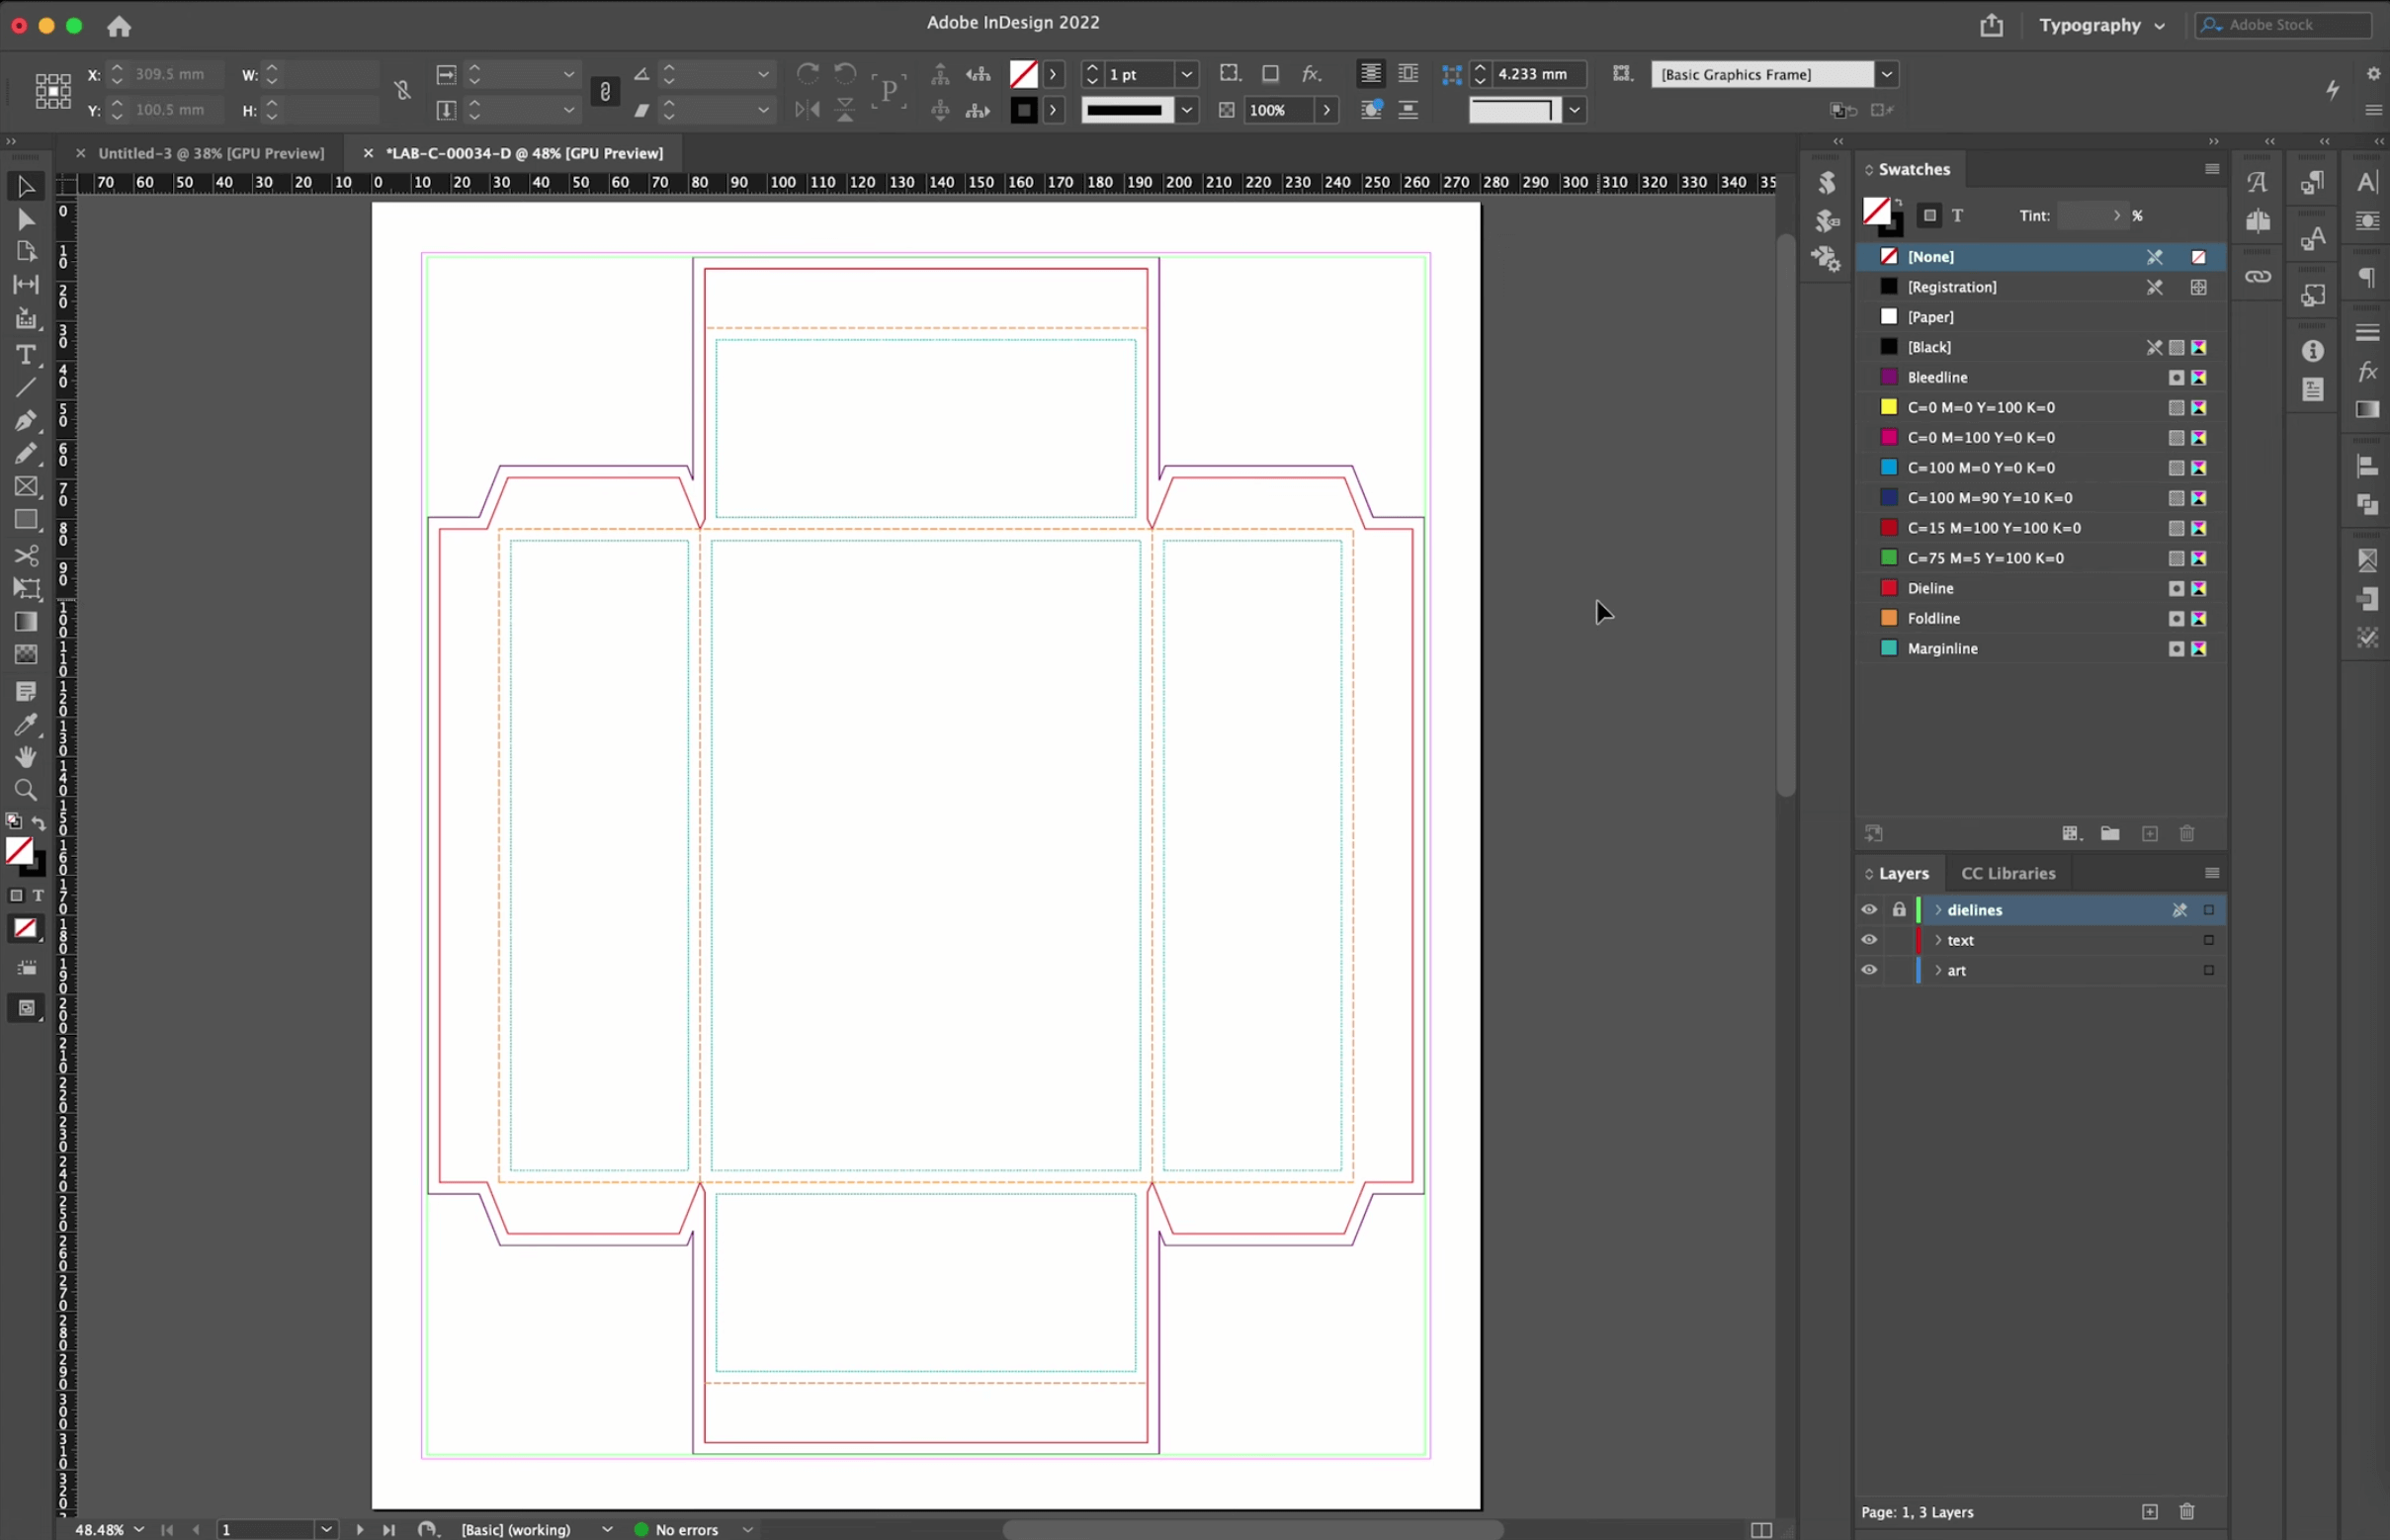 Screenshot: an open template in the Adobe InDesign interface